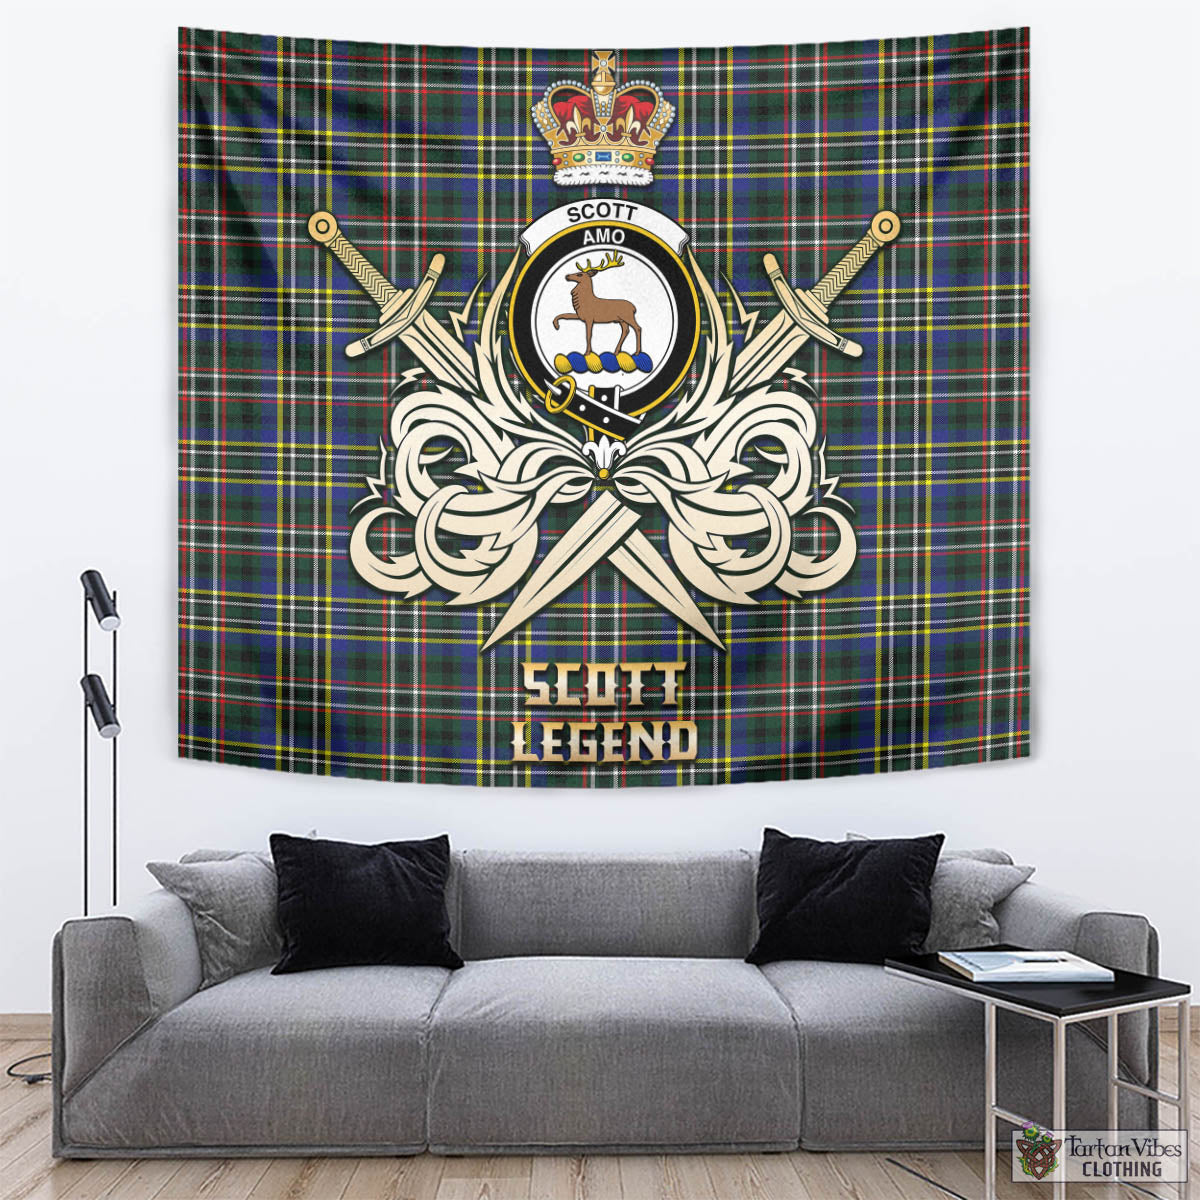 Tartan Vibes Clothing Scott Green Modern Tartan Tapestry with Clan Crest and the Golden Sword of Courageous Legacy